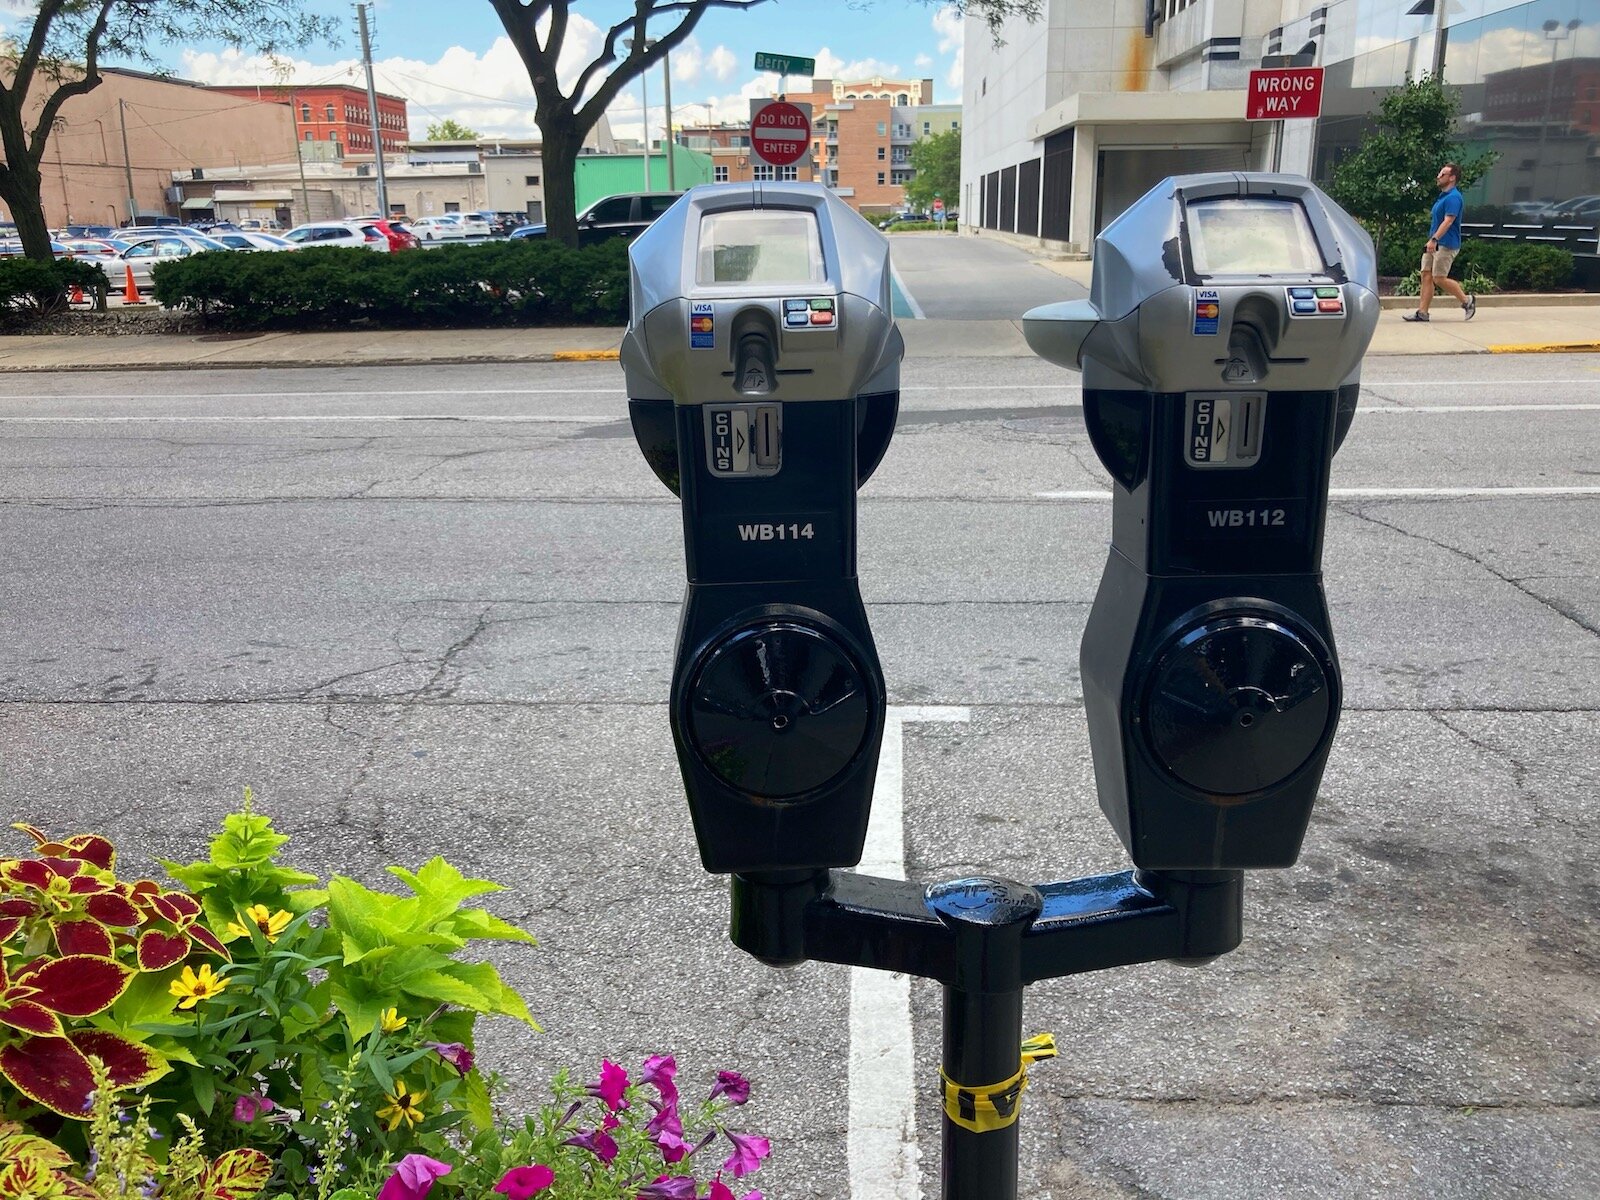 There are 800 street meters Downtown, including 25 accessible or handicapped spots.